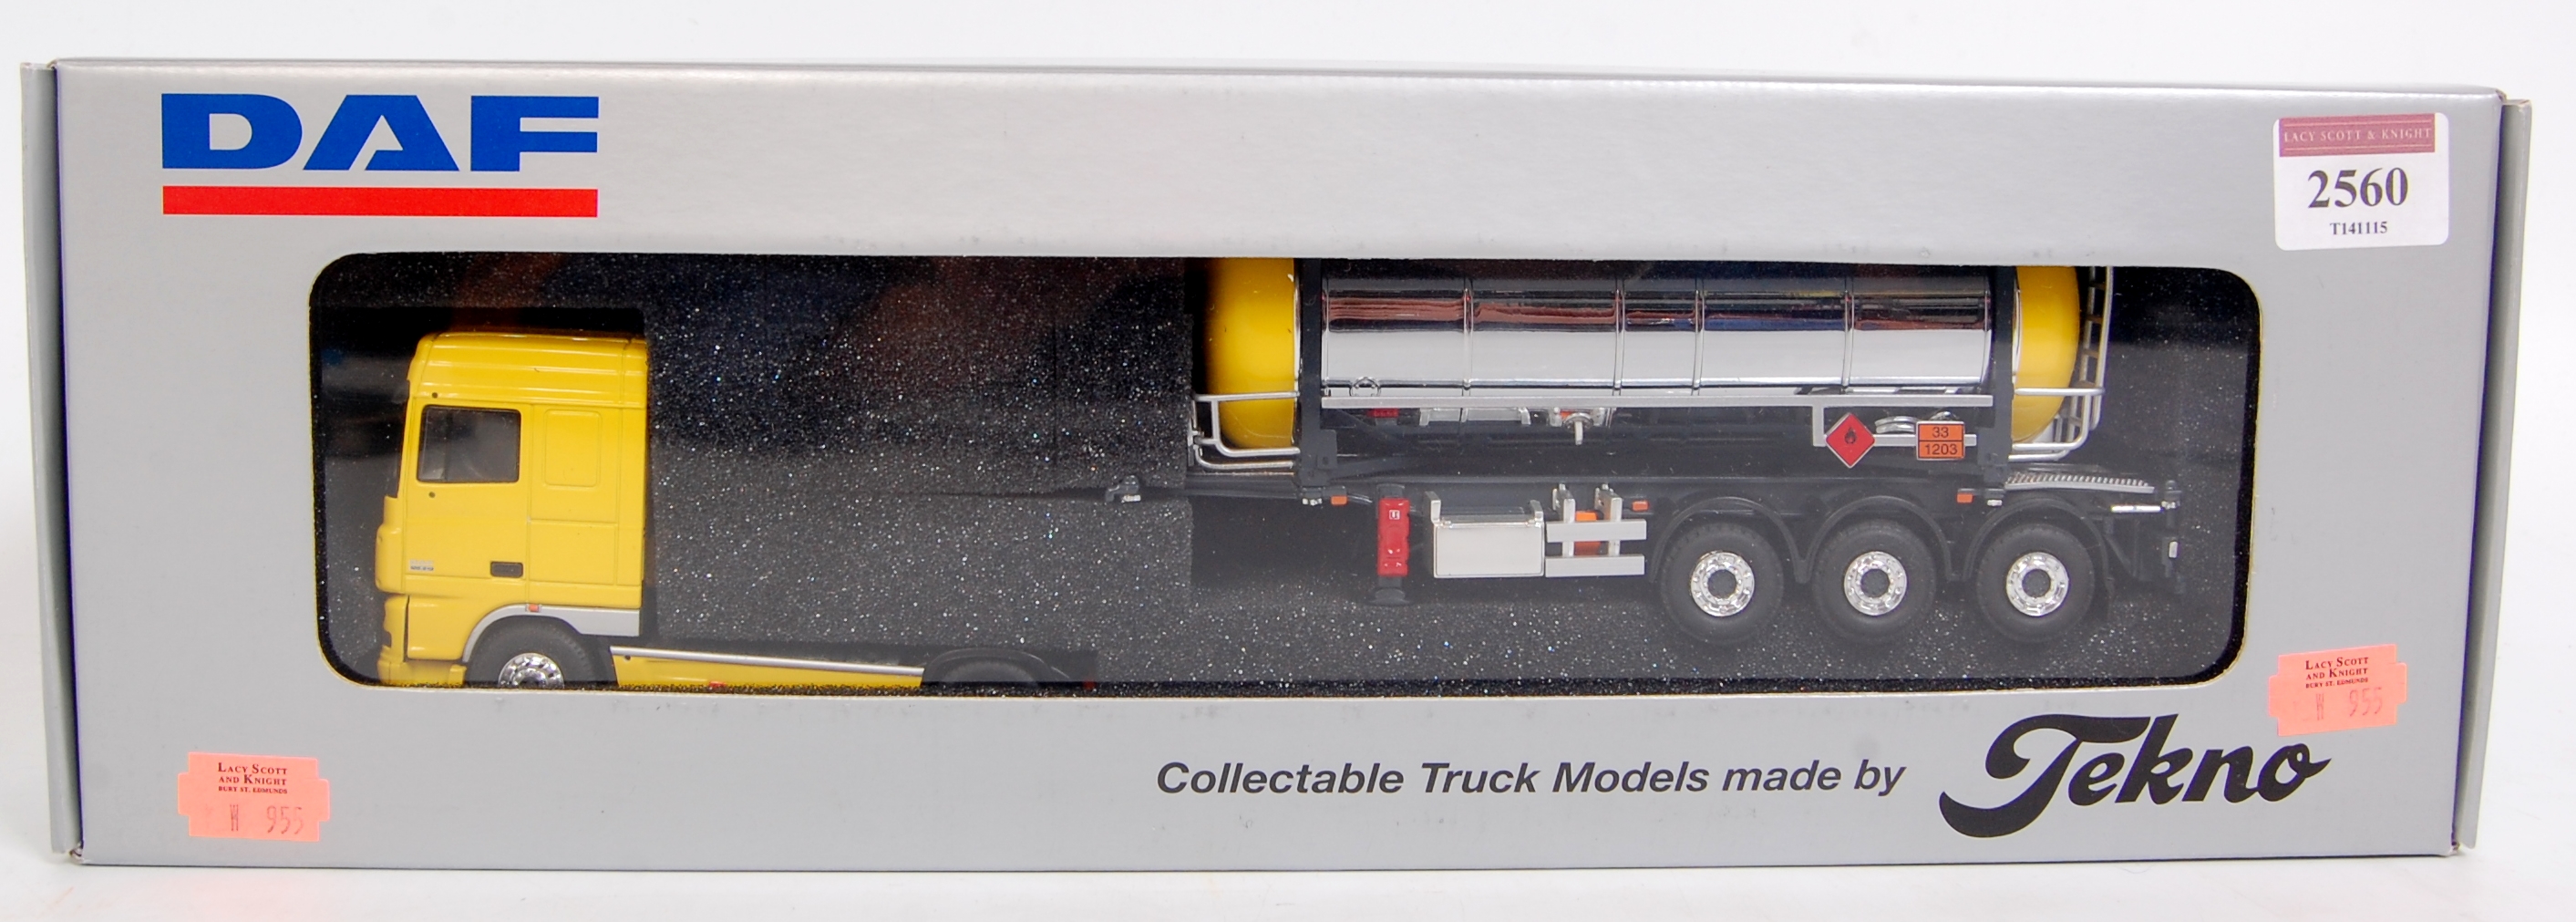 Tekno 1/50th scale Limited Edition Model of a DAF 105.